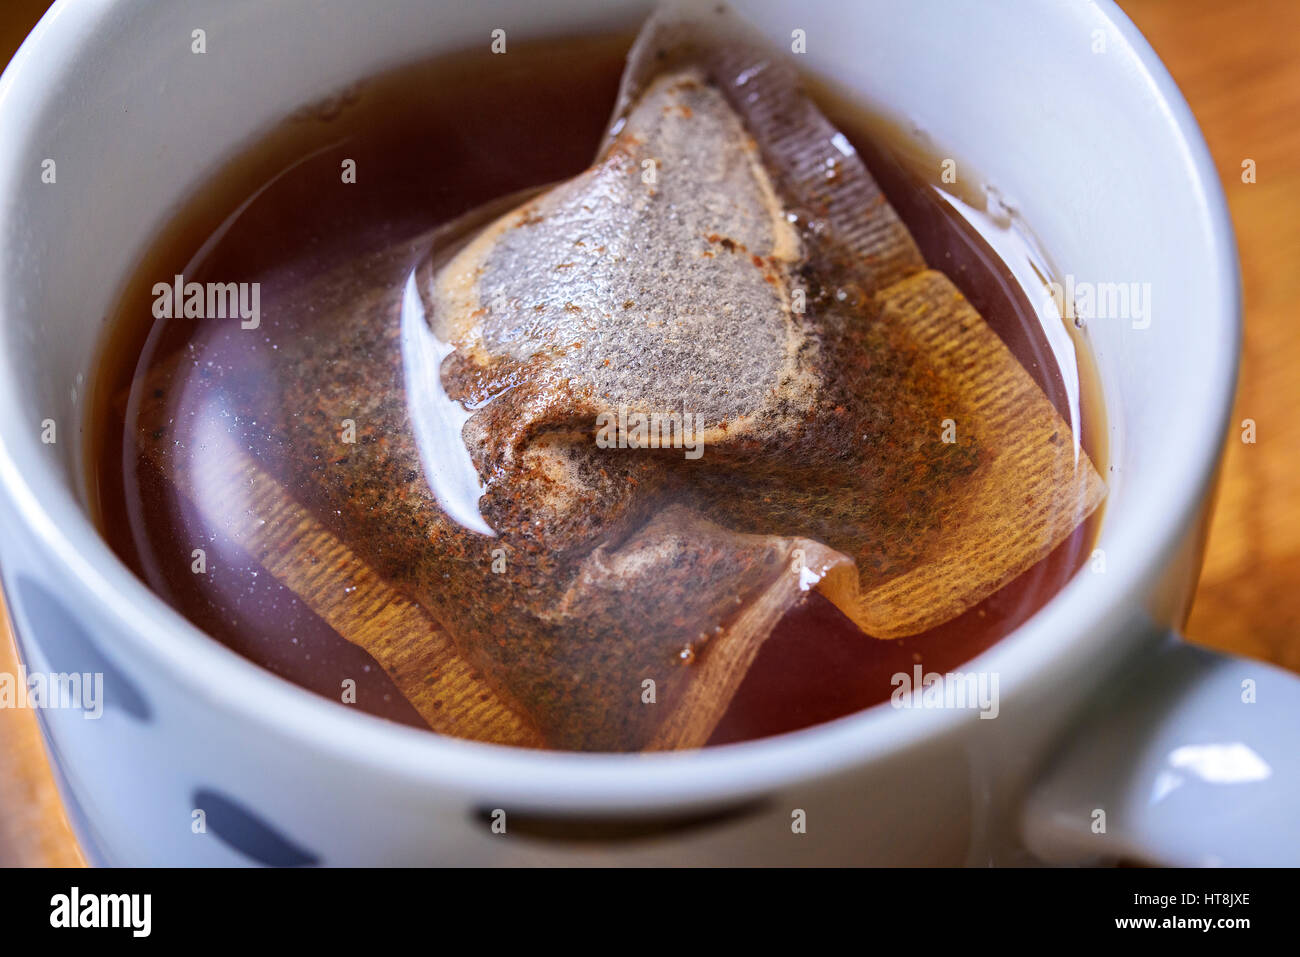 Cup of traditional English breakfast tea being made. Image shows tea bag infusing in a cup of boiling water. Floating on the surface Stock Photo